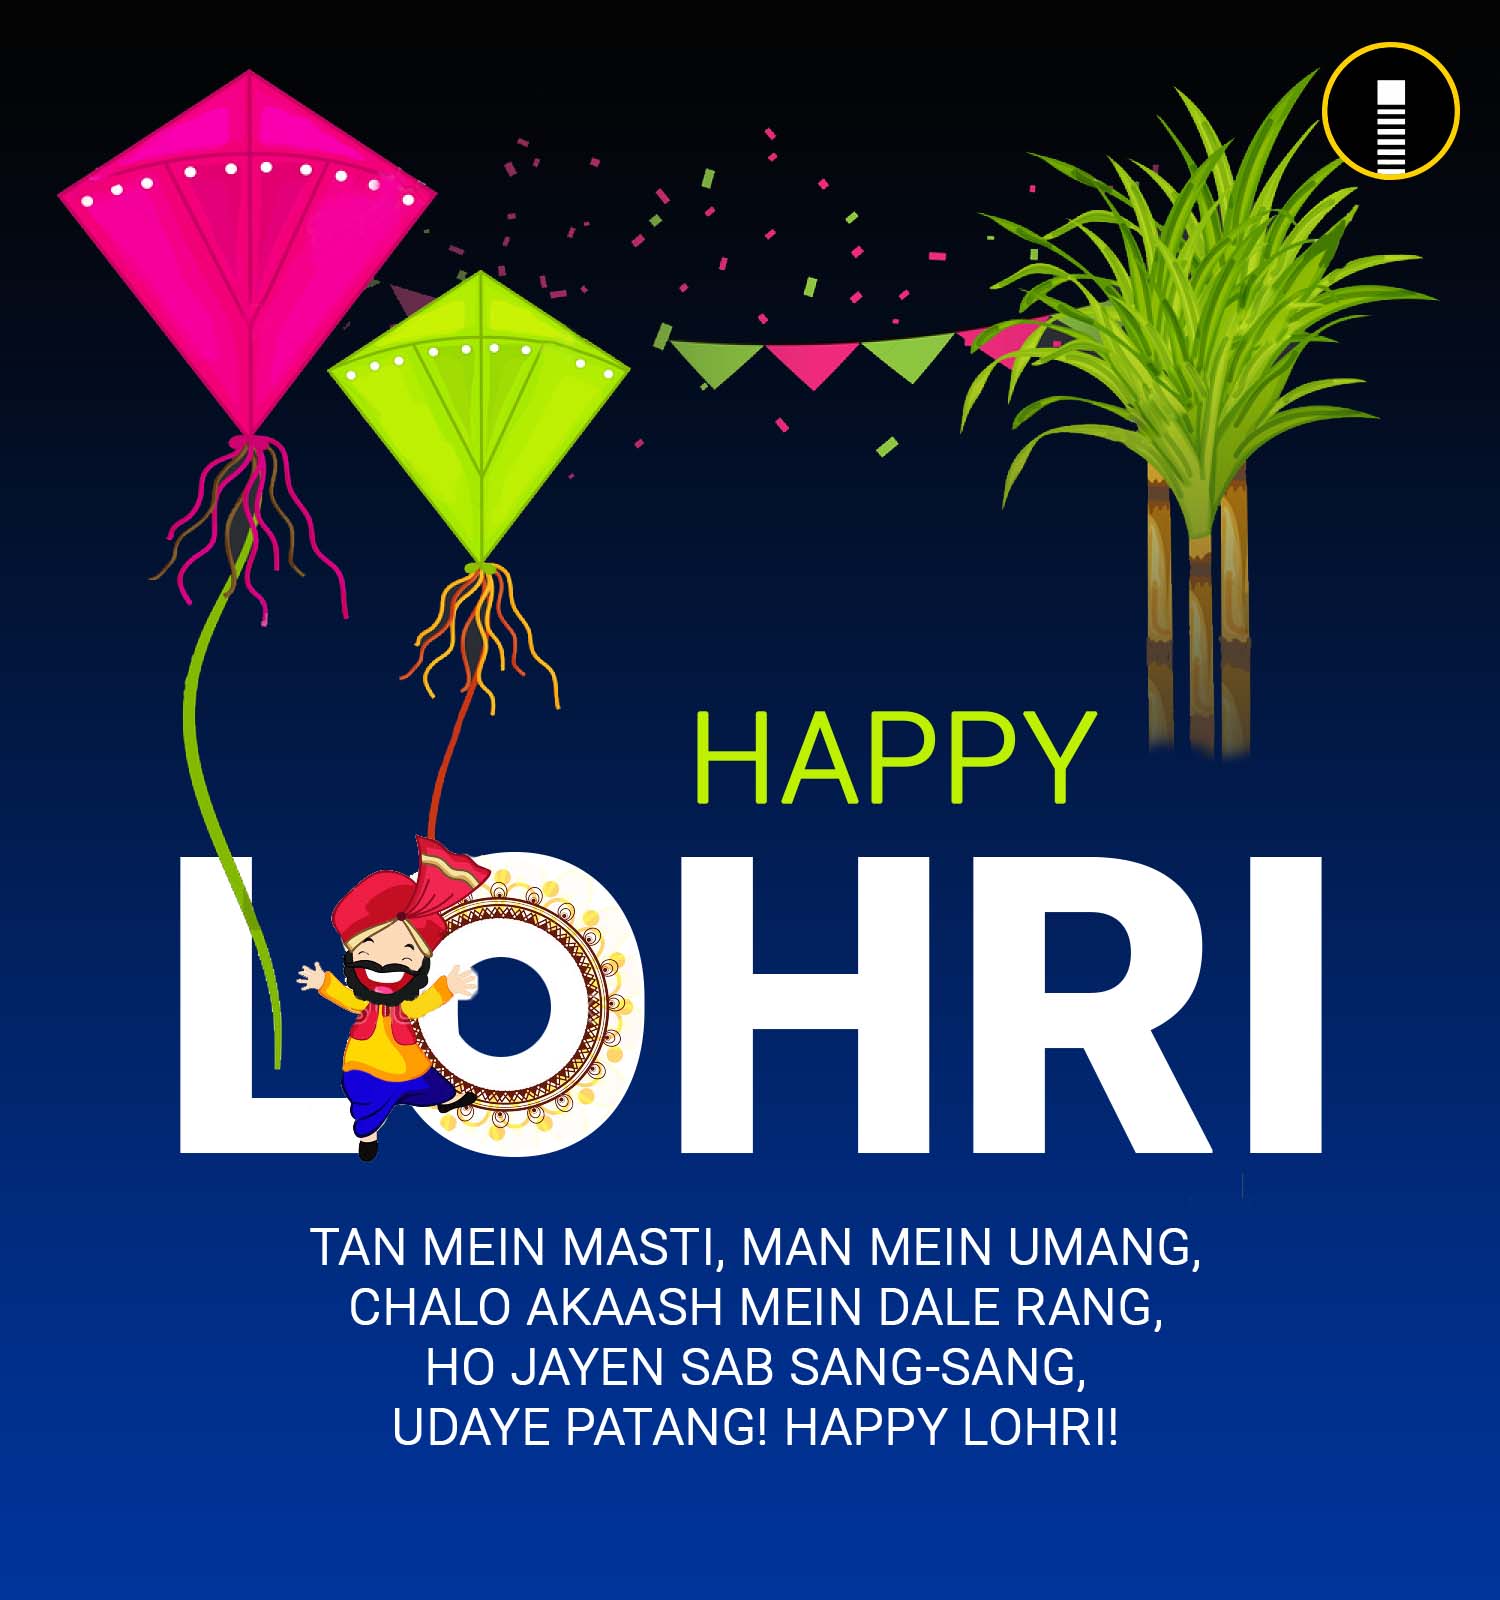 Free Greeting Cards and Banner PSD for Happy Lohri Festival